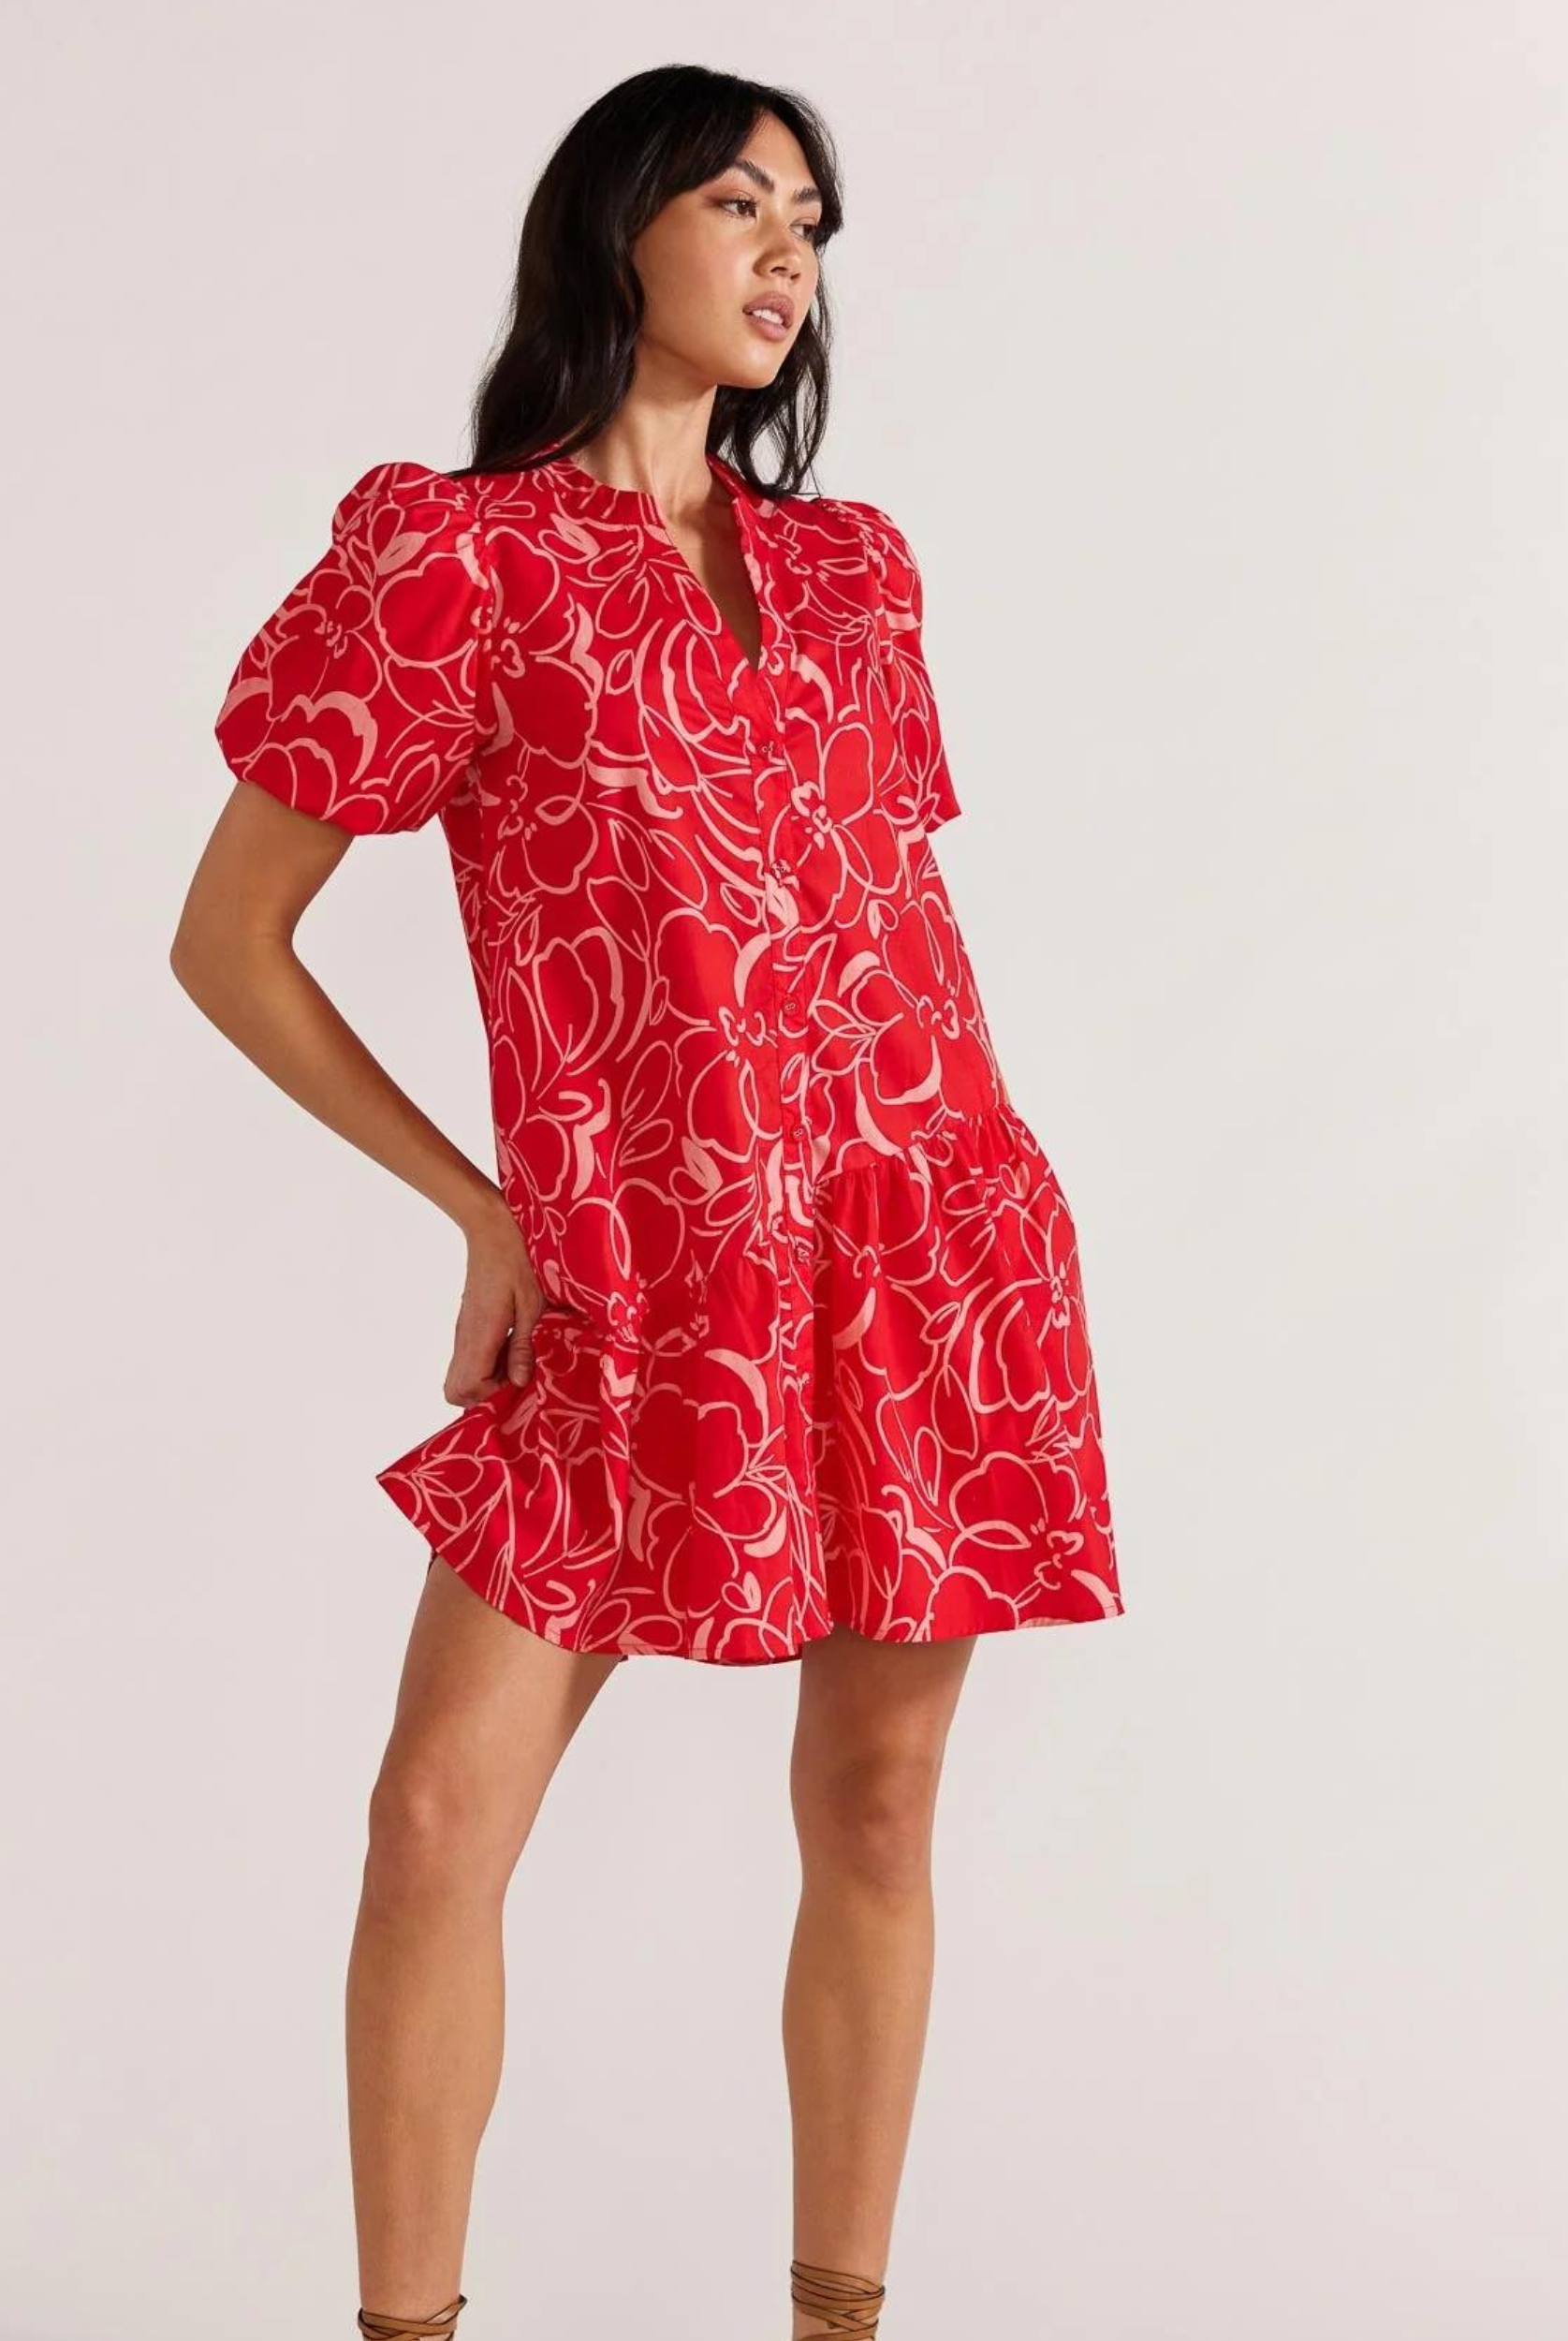 Staple the Label Palermo Mini Dress from Staple the Label